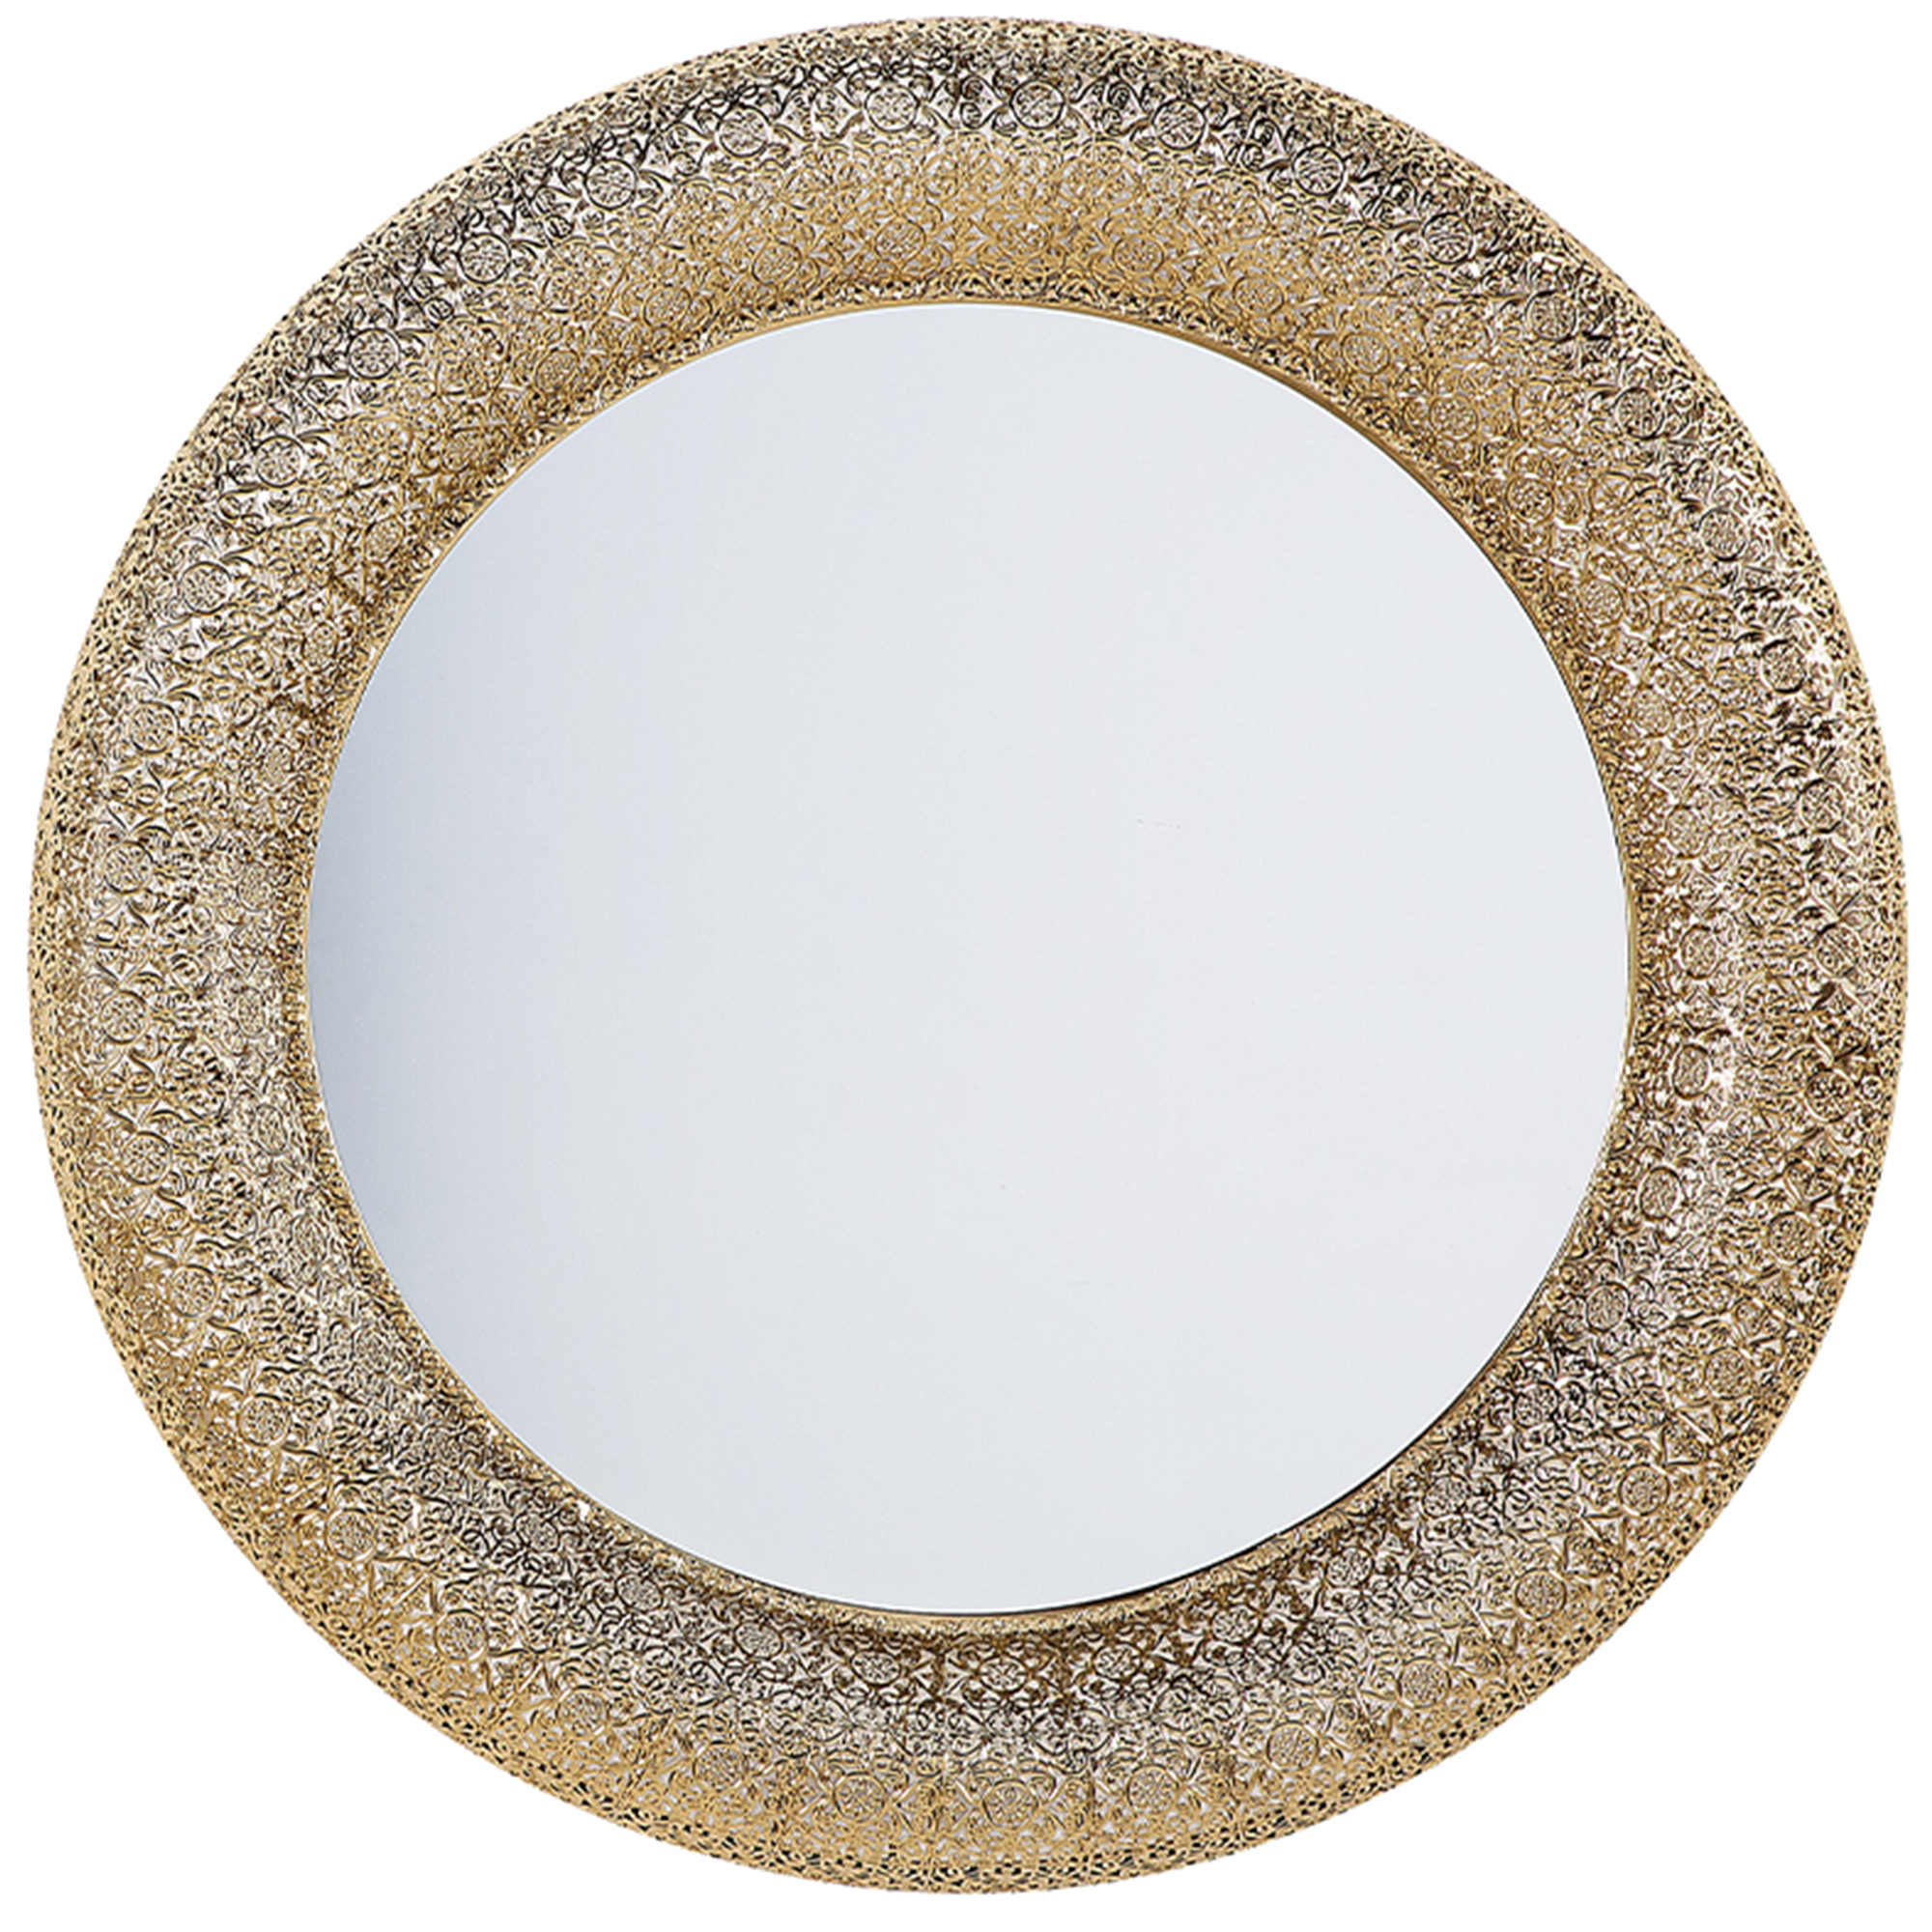 Beliani Wall Mounted Hanging Mirror Gold Round 80 cm Decorative Accent Piece Painted